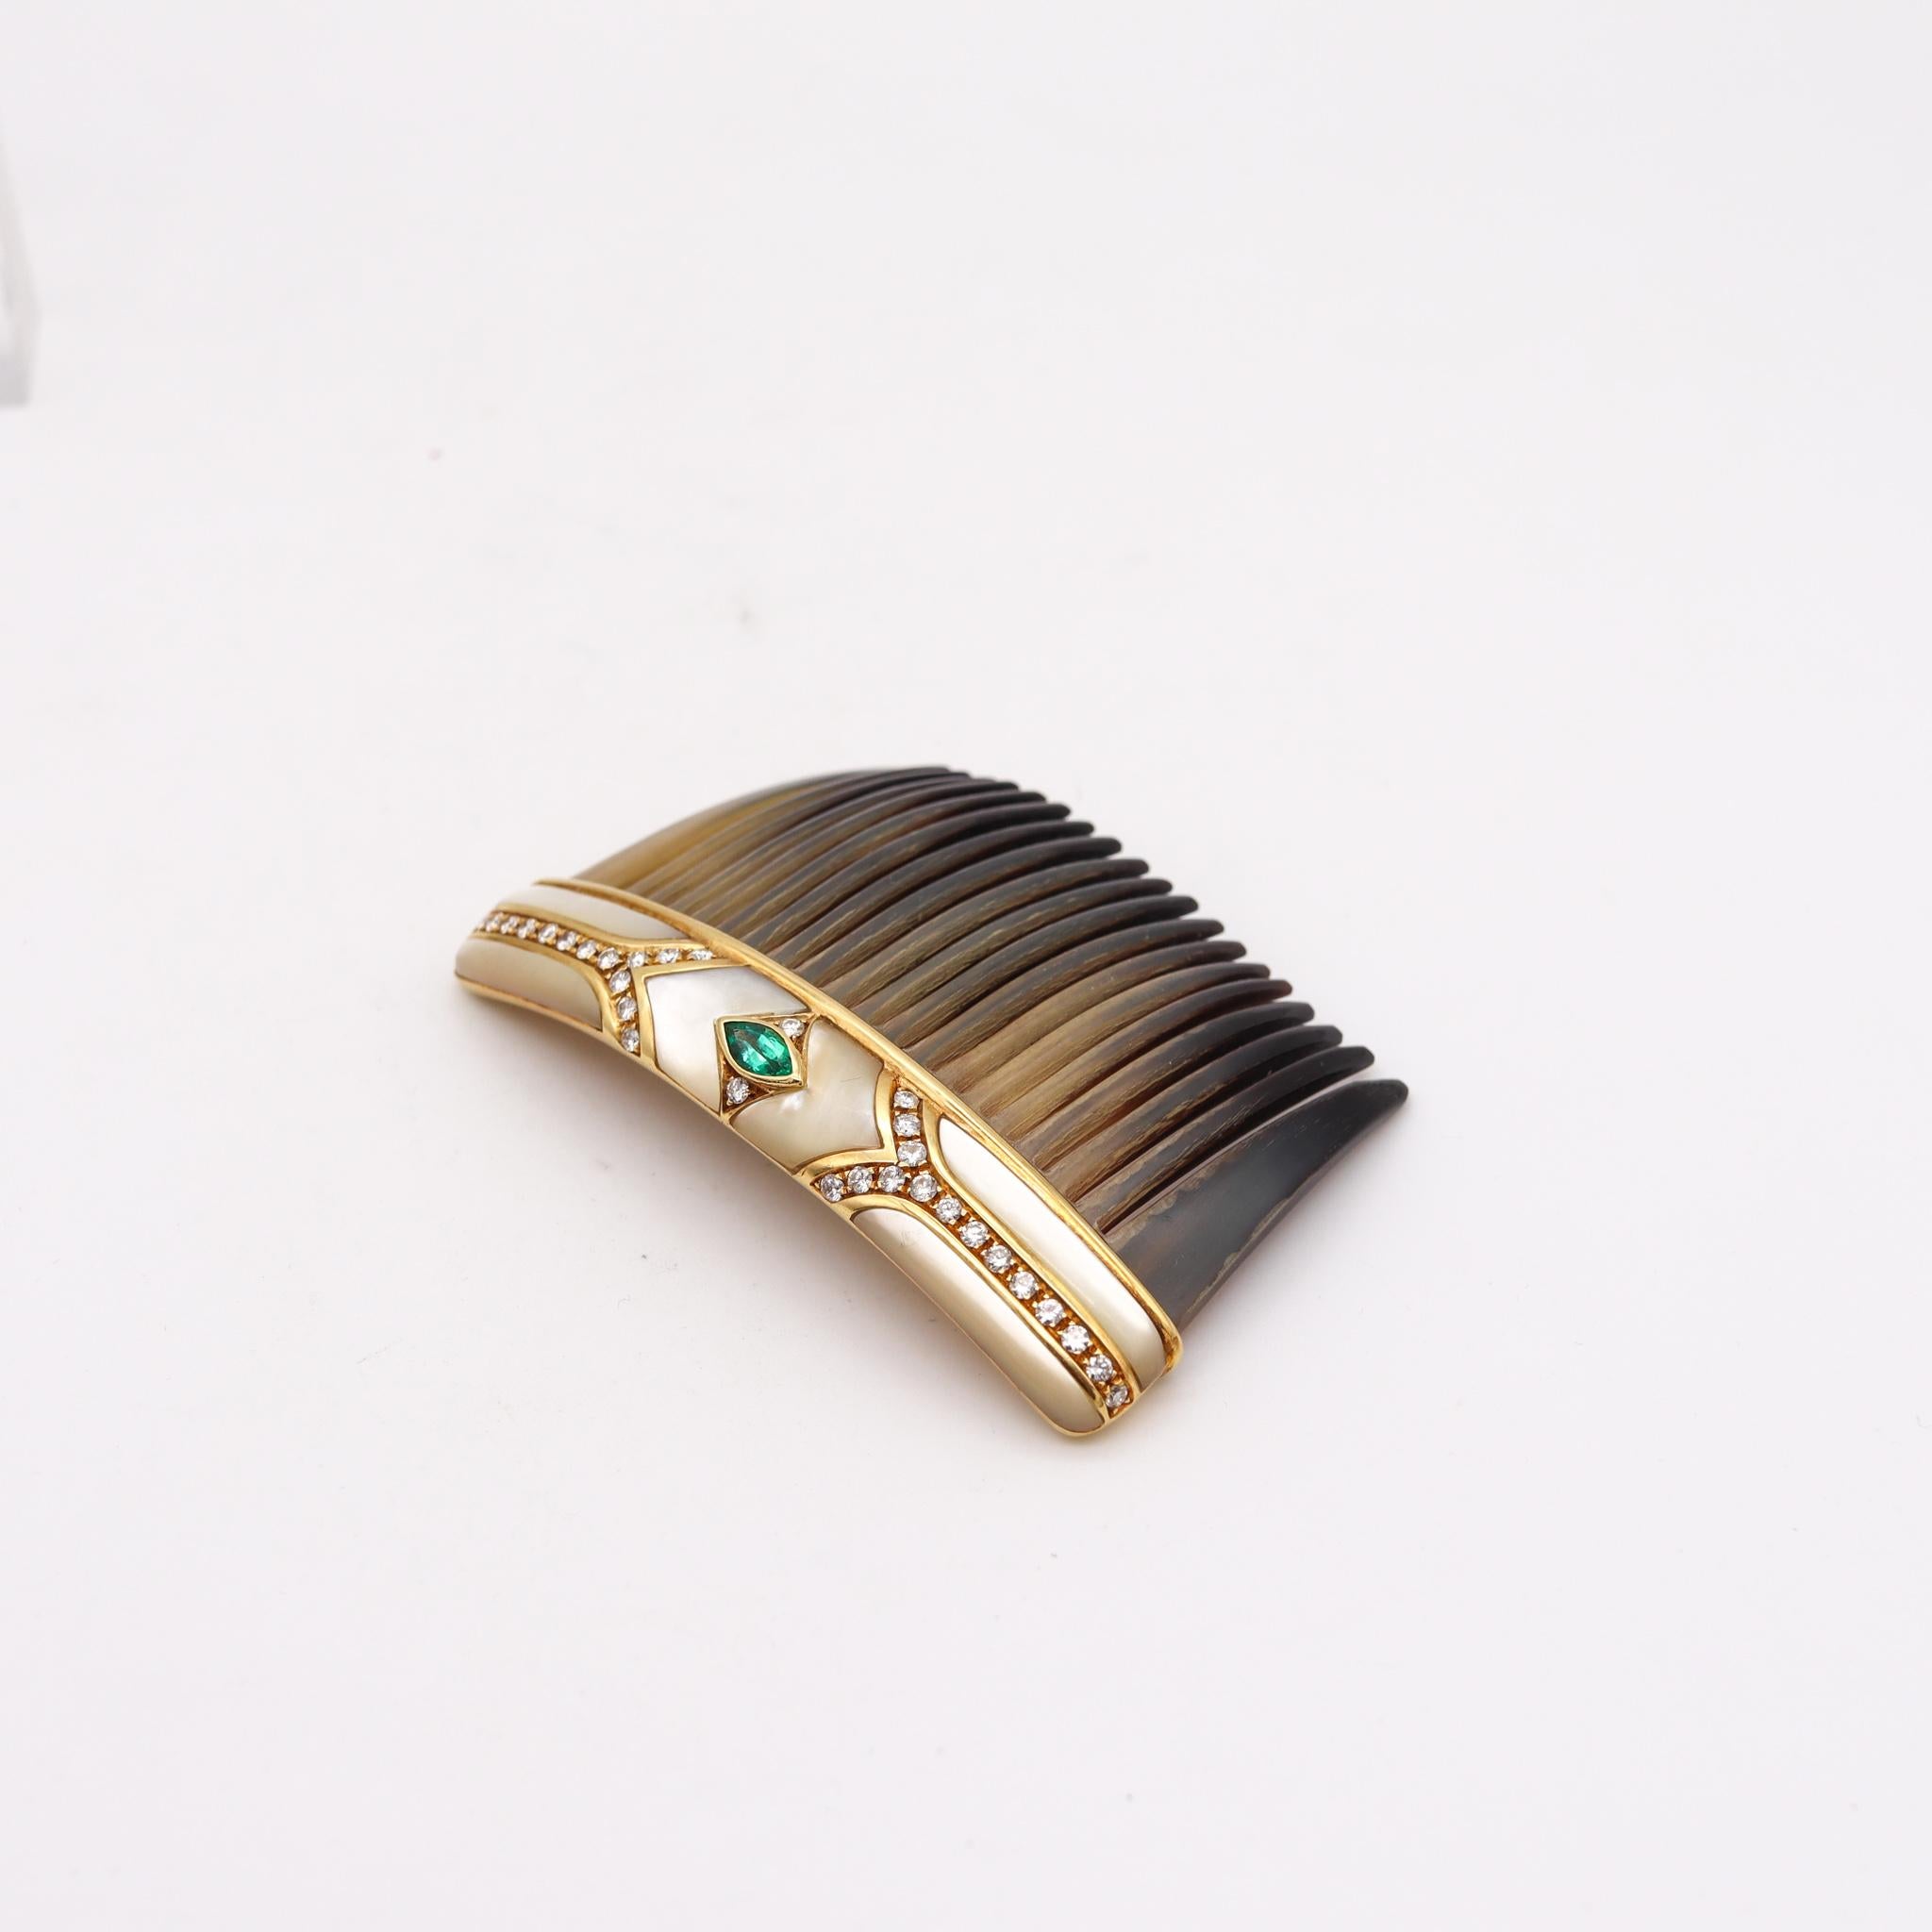 Gems set hair comb designed by Chaumet.

Fabulous and very luxurious gems set hair comb, created in Paris France by the house of Chaumet, back in the 1968. Beautifully mounted in a frame crafted in solid yellow gold of 18 karats with high polished